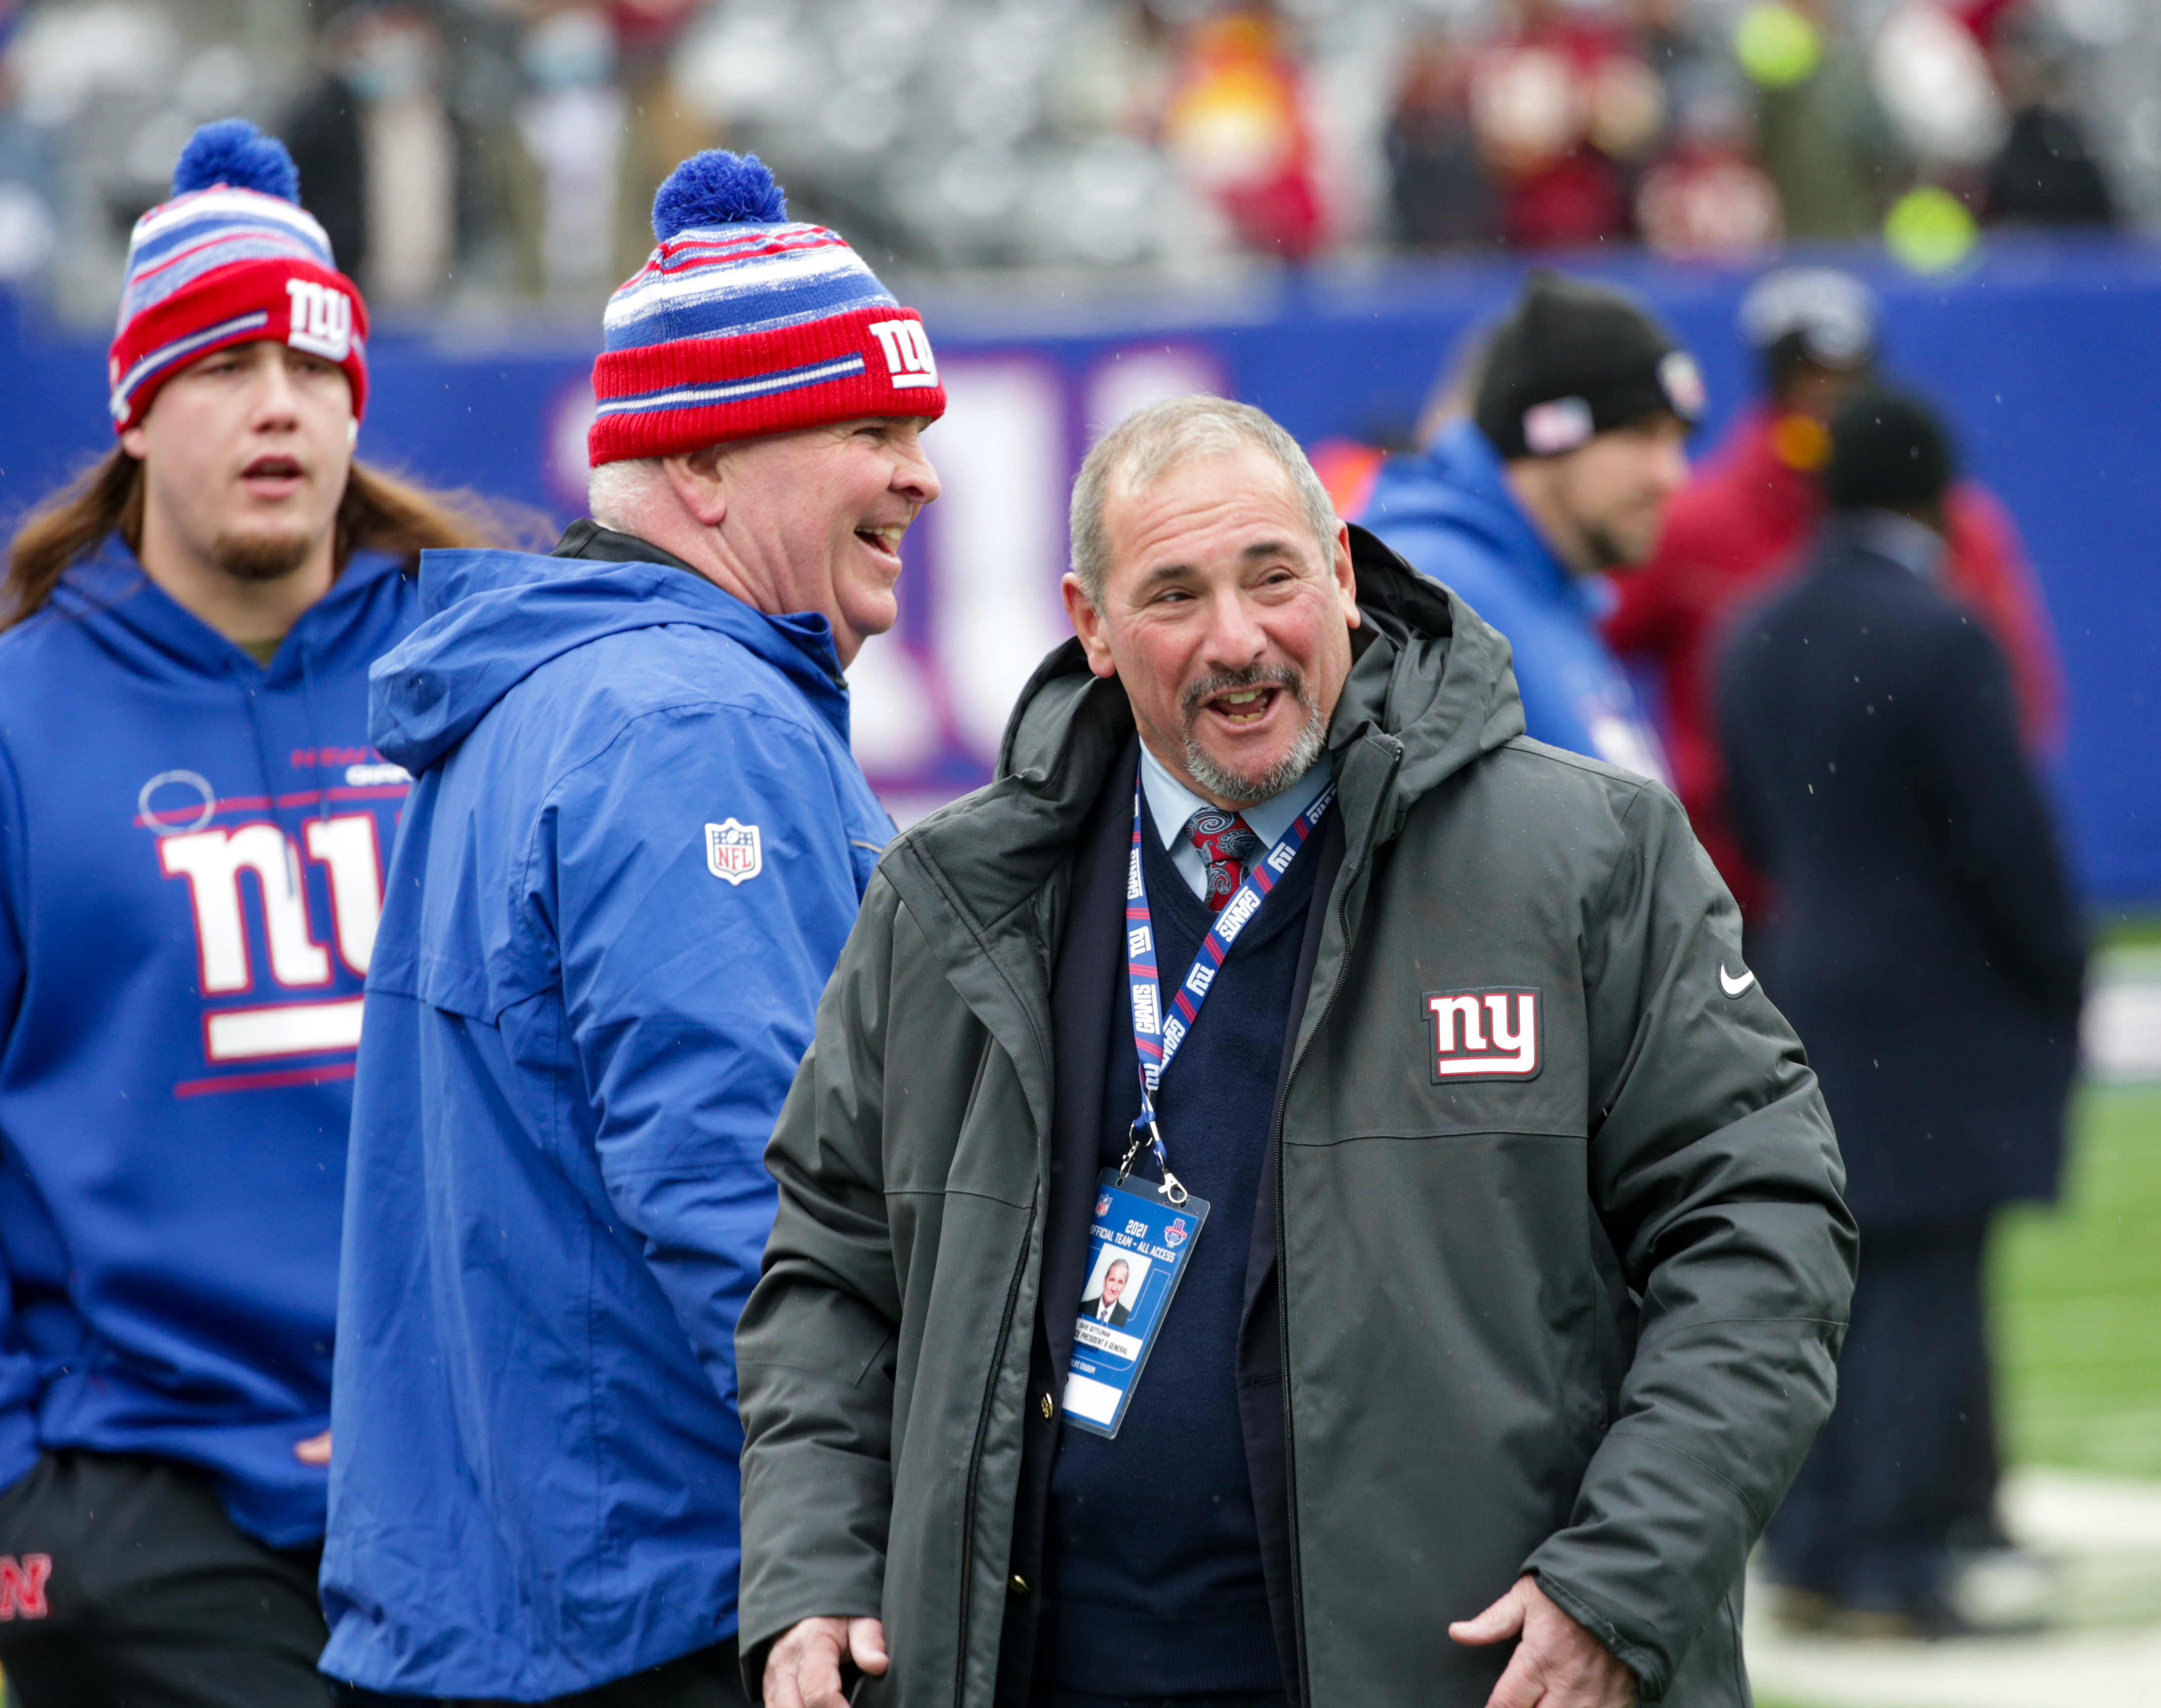 New York Giants general manager Dave Gettleman has a laugh with Giants security man Mike Murphy during pregame warmups as the Giants prepare to host the Washington Football Team on Sunday, Jan. 9, 2022 in East Rutherford, N.J.